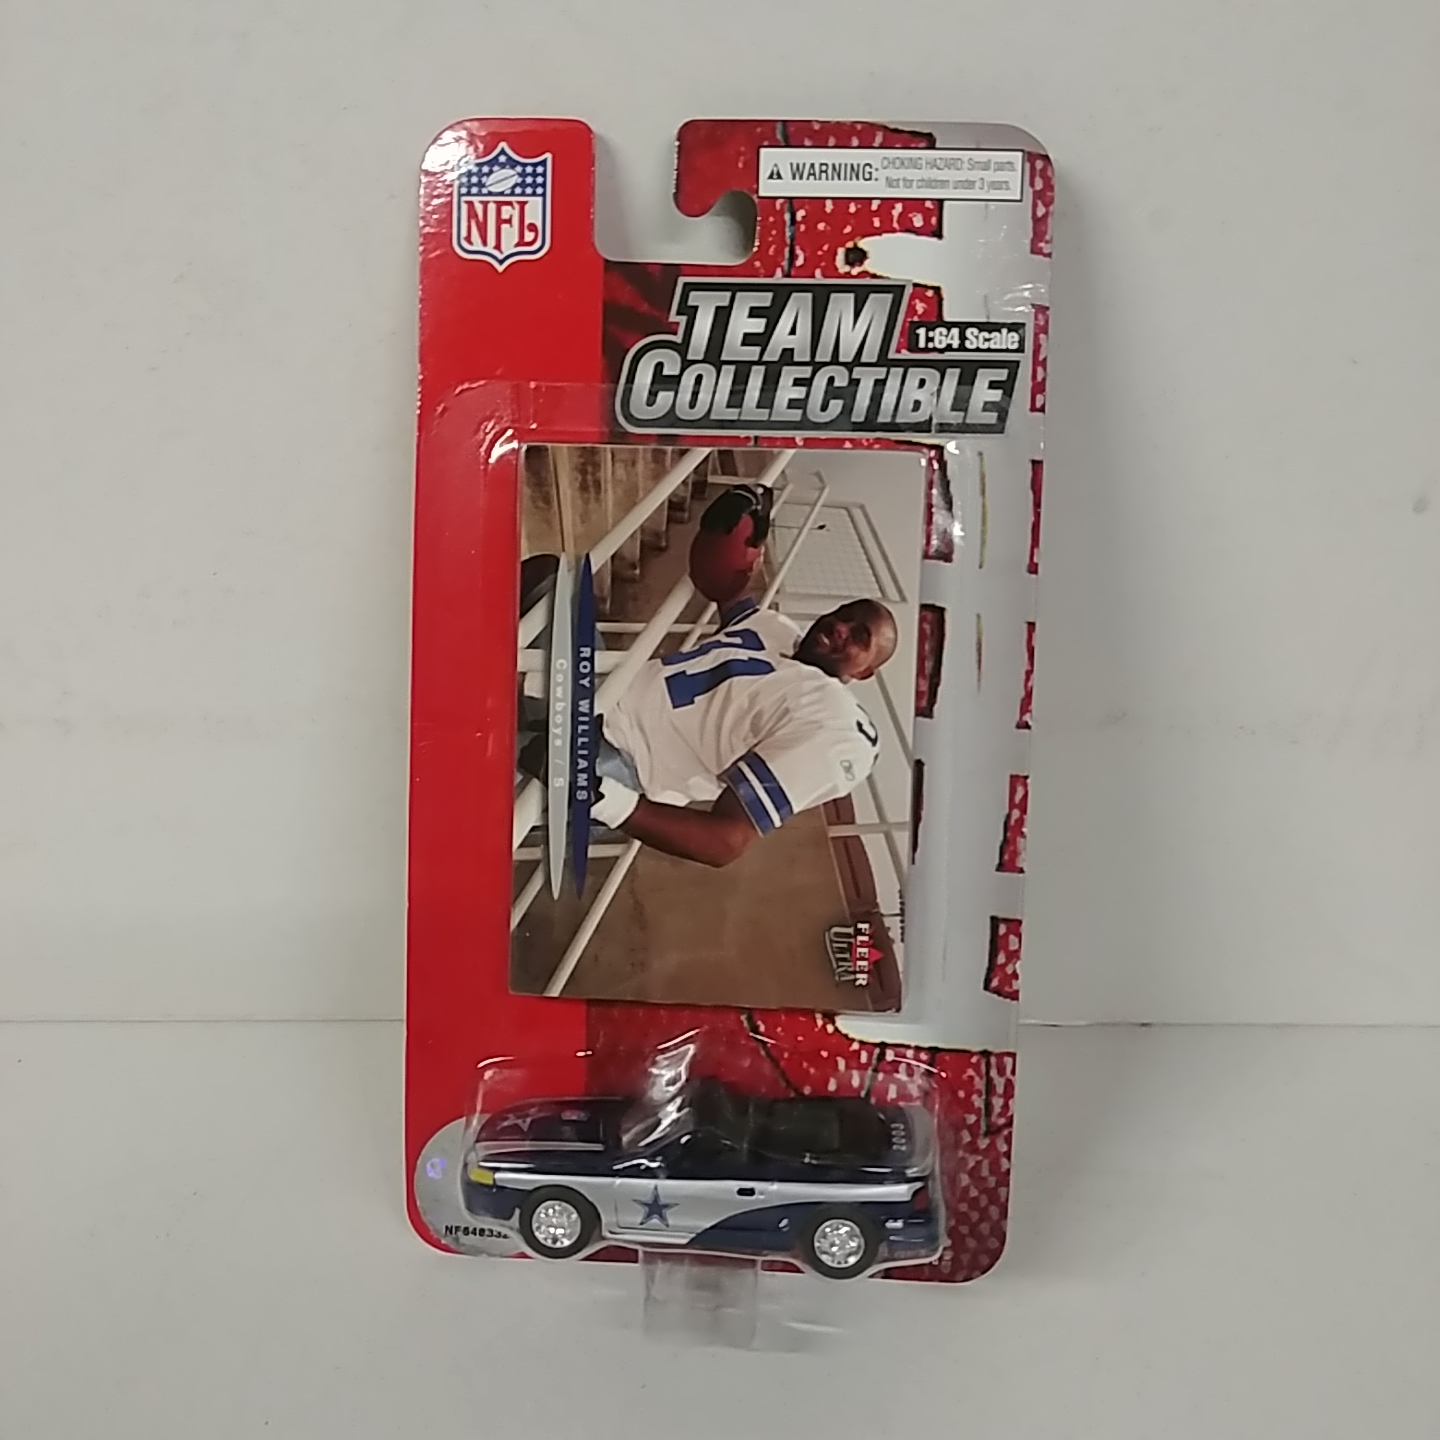 2003 Dallas Cowboys 1/64th Mustang convertible with Roy Williams card